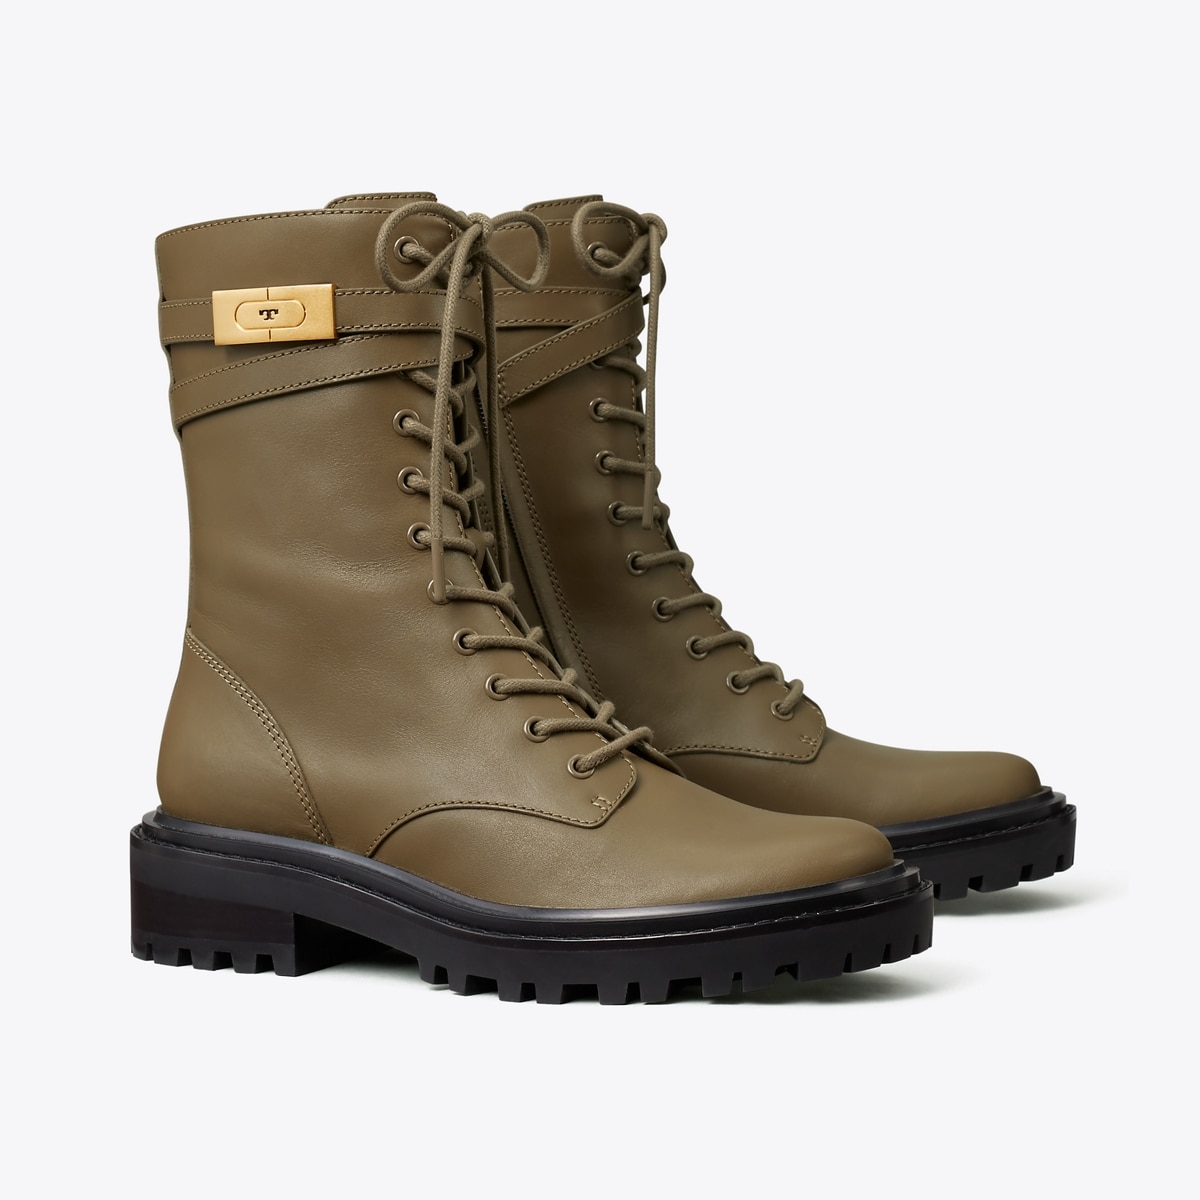 T Hardware Lug-Sole Boot: Women's Designer Ankle Boots | Tory Burch